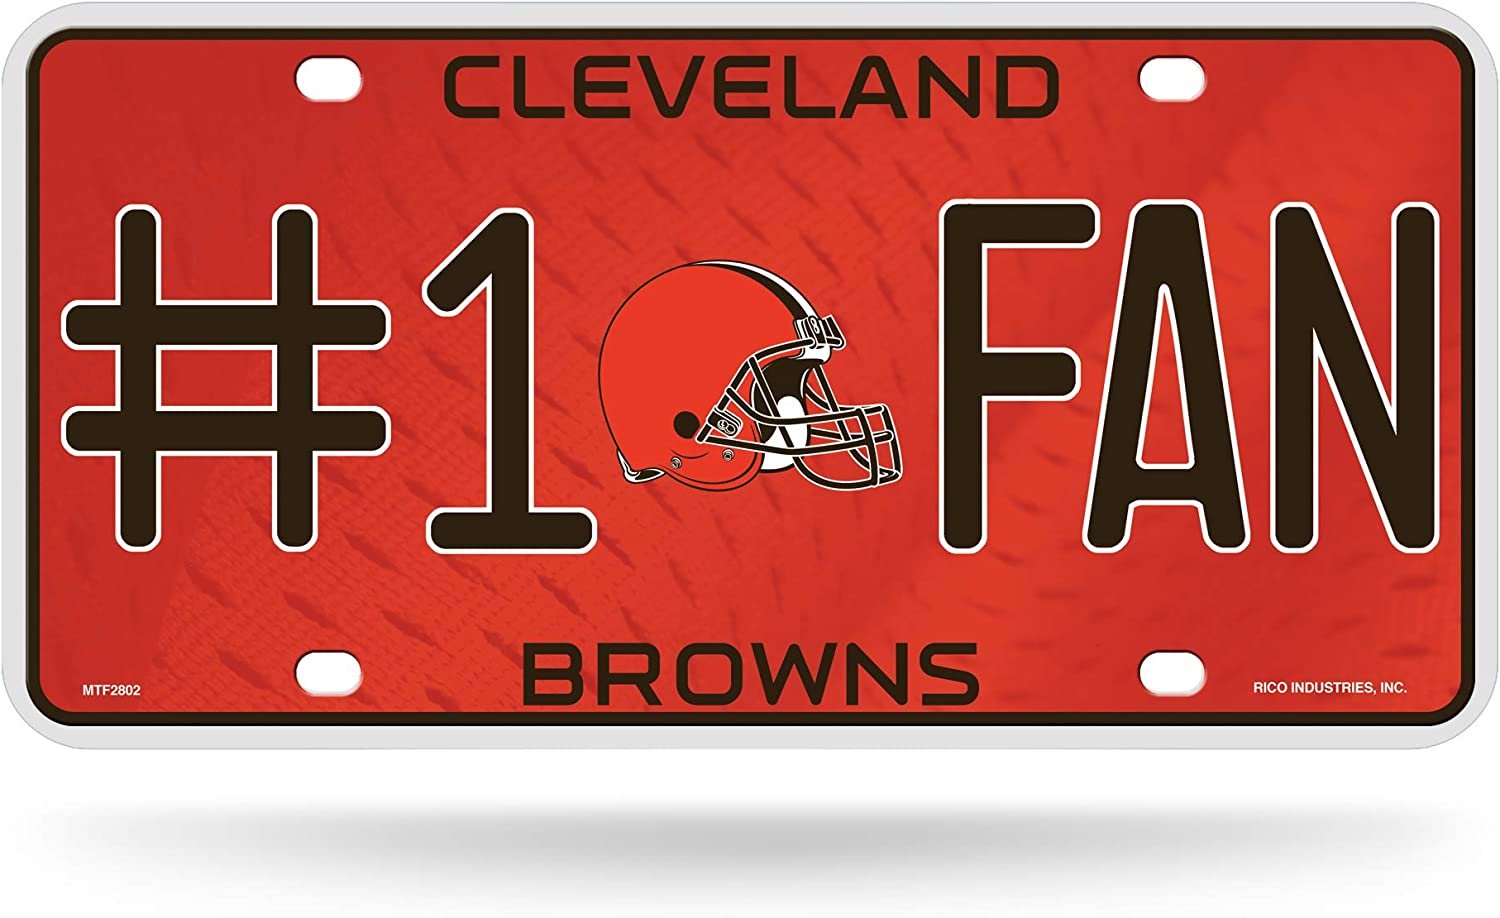 Cleveland Browns #1 Fan Metal License Plate Tag